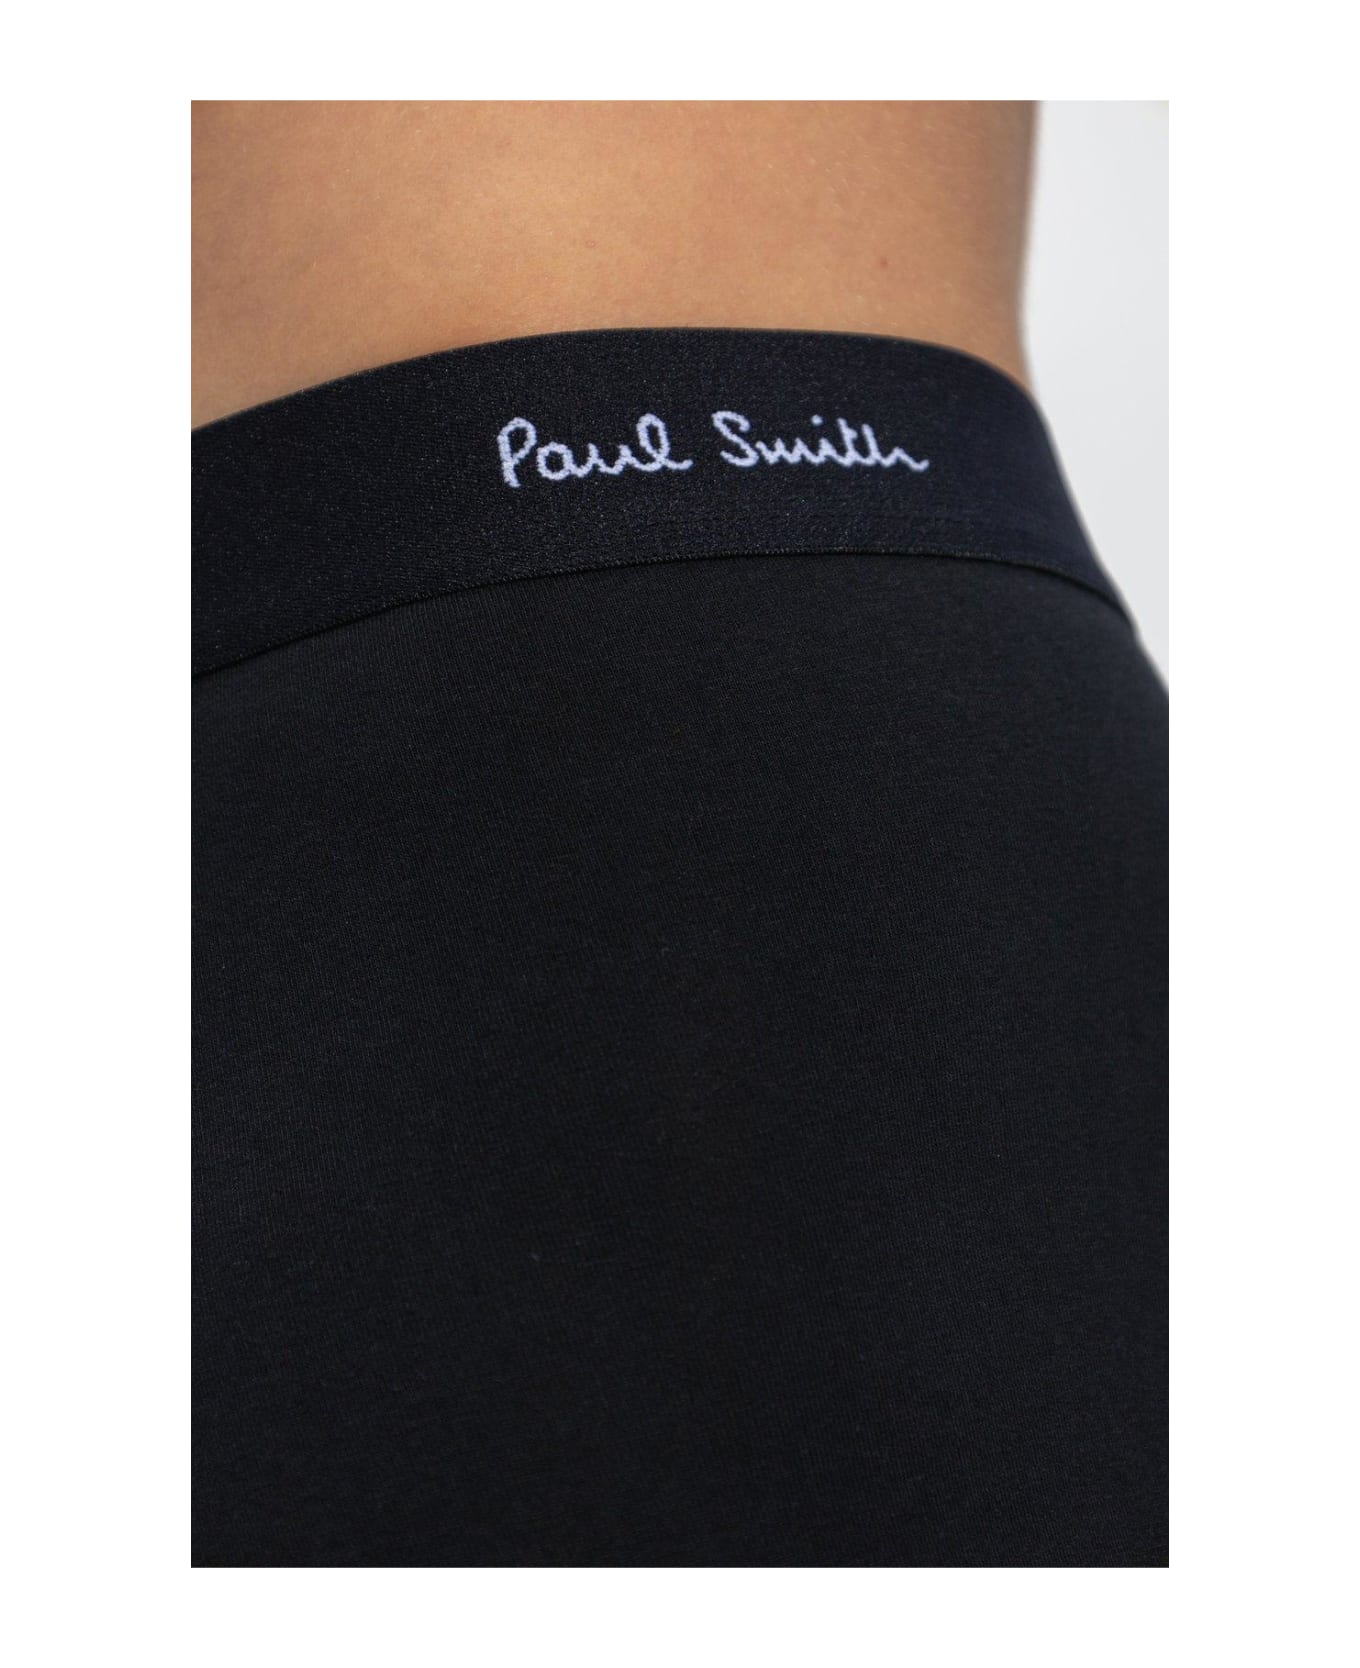 Paul Smith Branded Boxers 3 Pack - Black